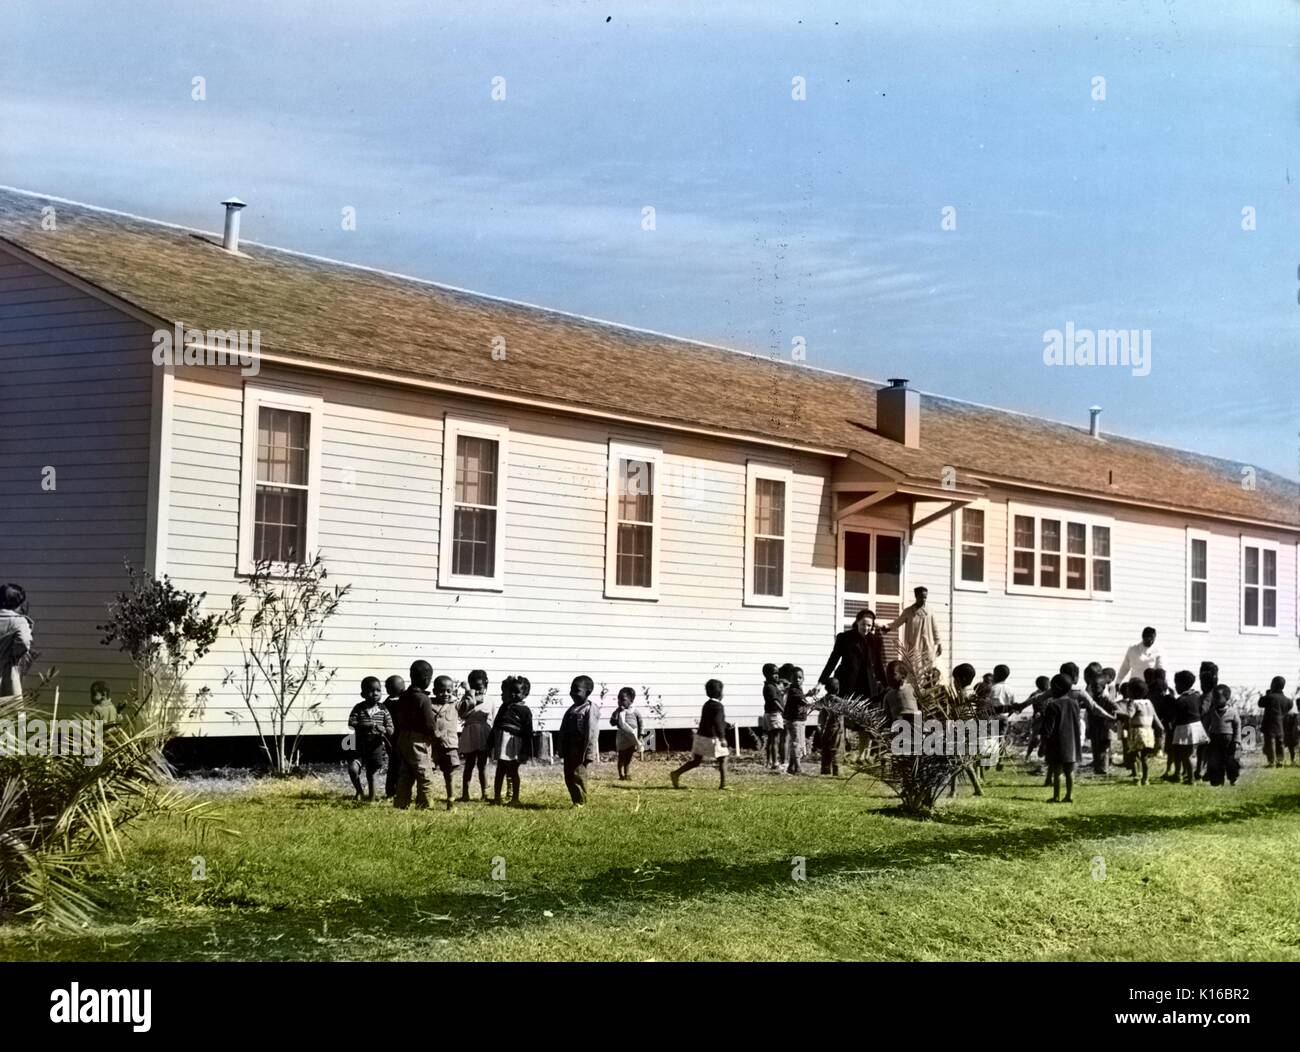 African-American children playing outside of nursery at Okeechobee migratory labor camps built by Farm Security Administration, Belle Glade, Florida, 1941. From the New York Public Library. Note: Image has been digitally colorized using a modern process. Colors may not be period-accurate. Stock Photo